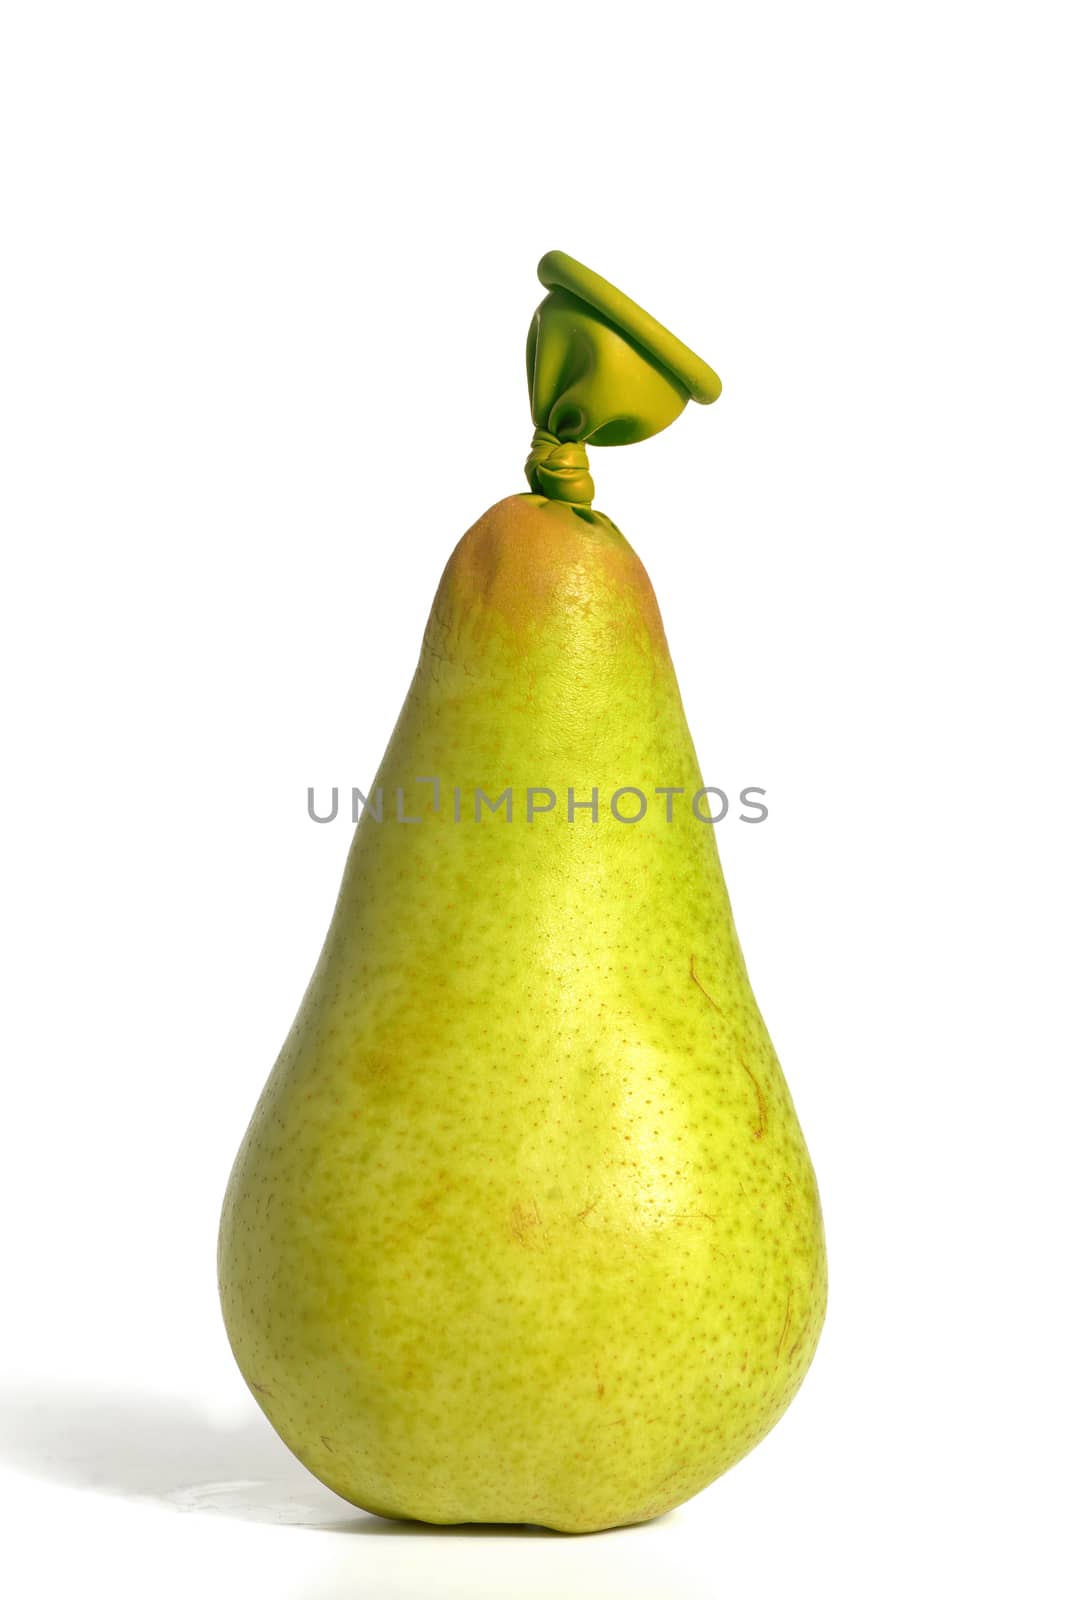 Abstract pear fruit from balloons